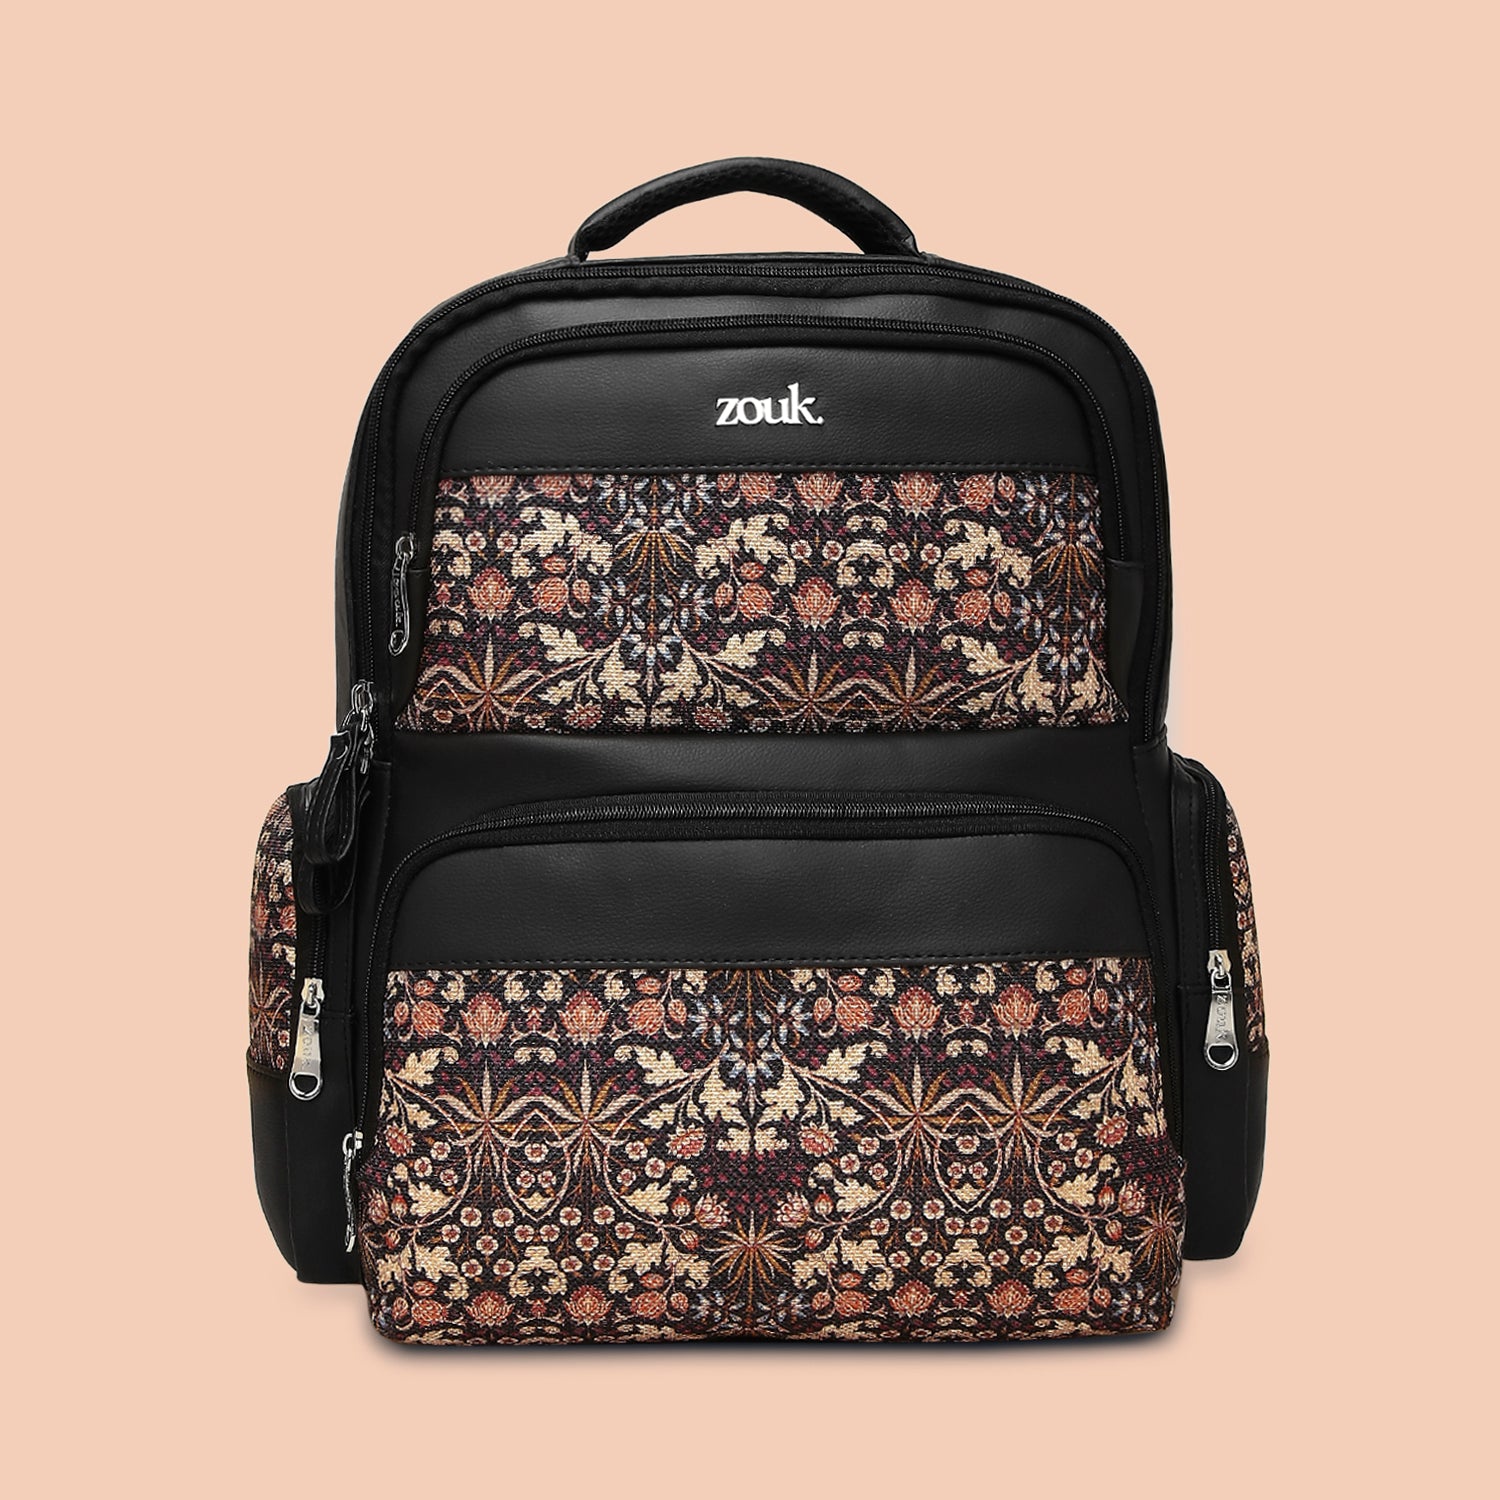 Kashmir Blooms Consultant Backpack